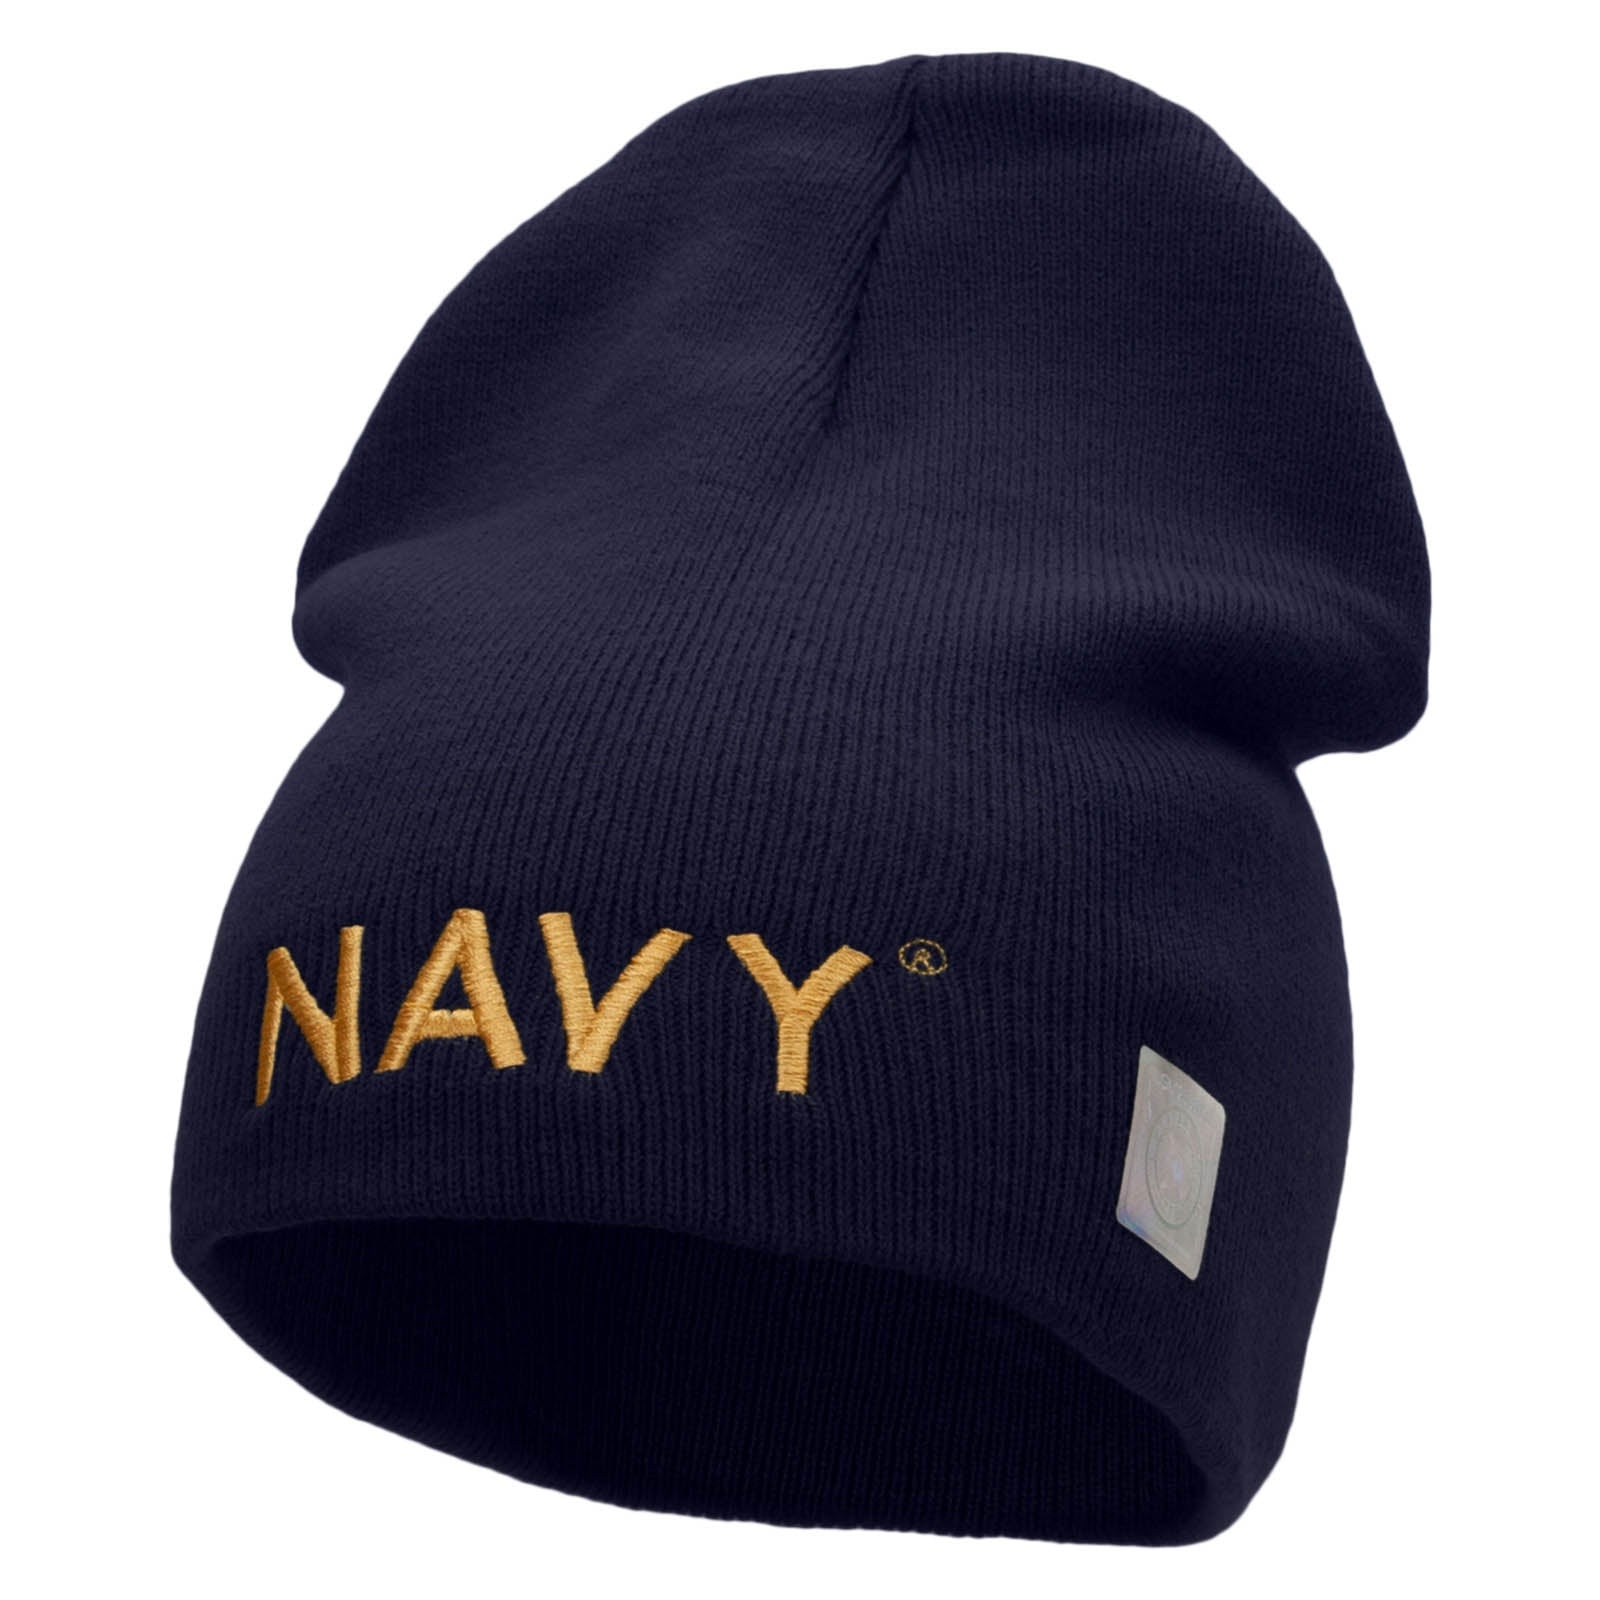 Licensed Navy Military Embroidered Short Beanie Made in USA - Navy OSFM